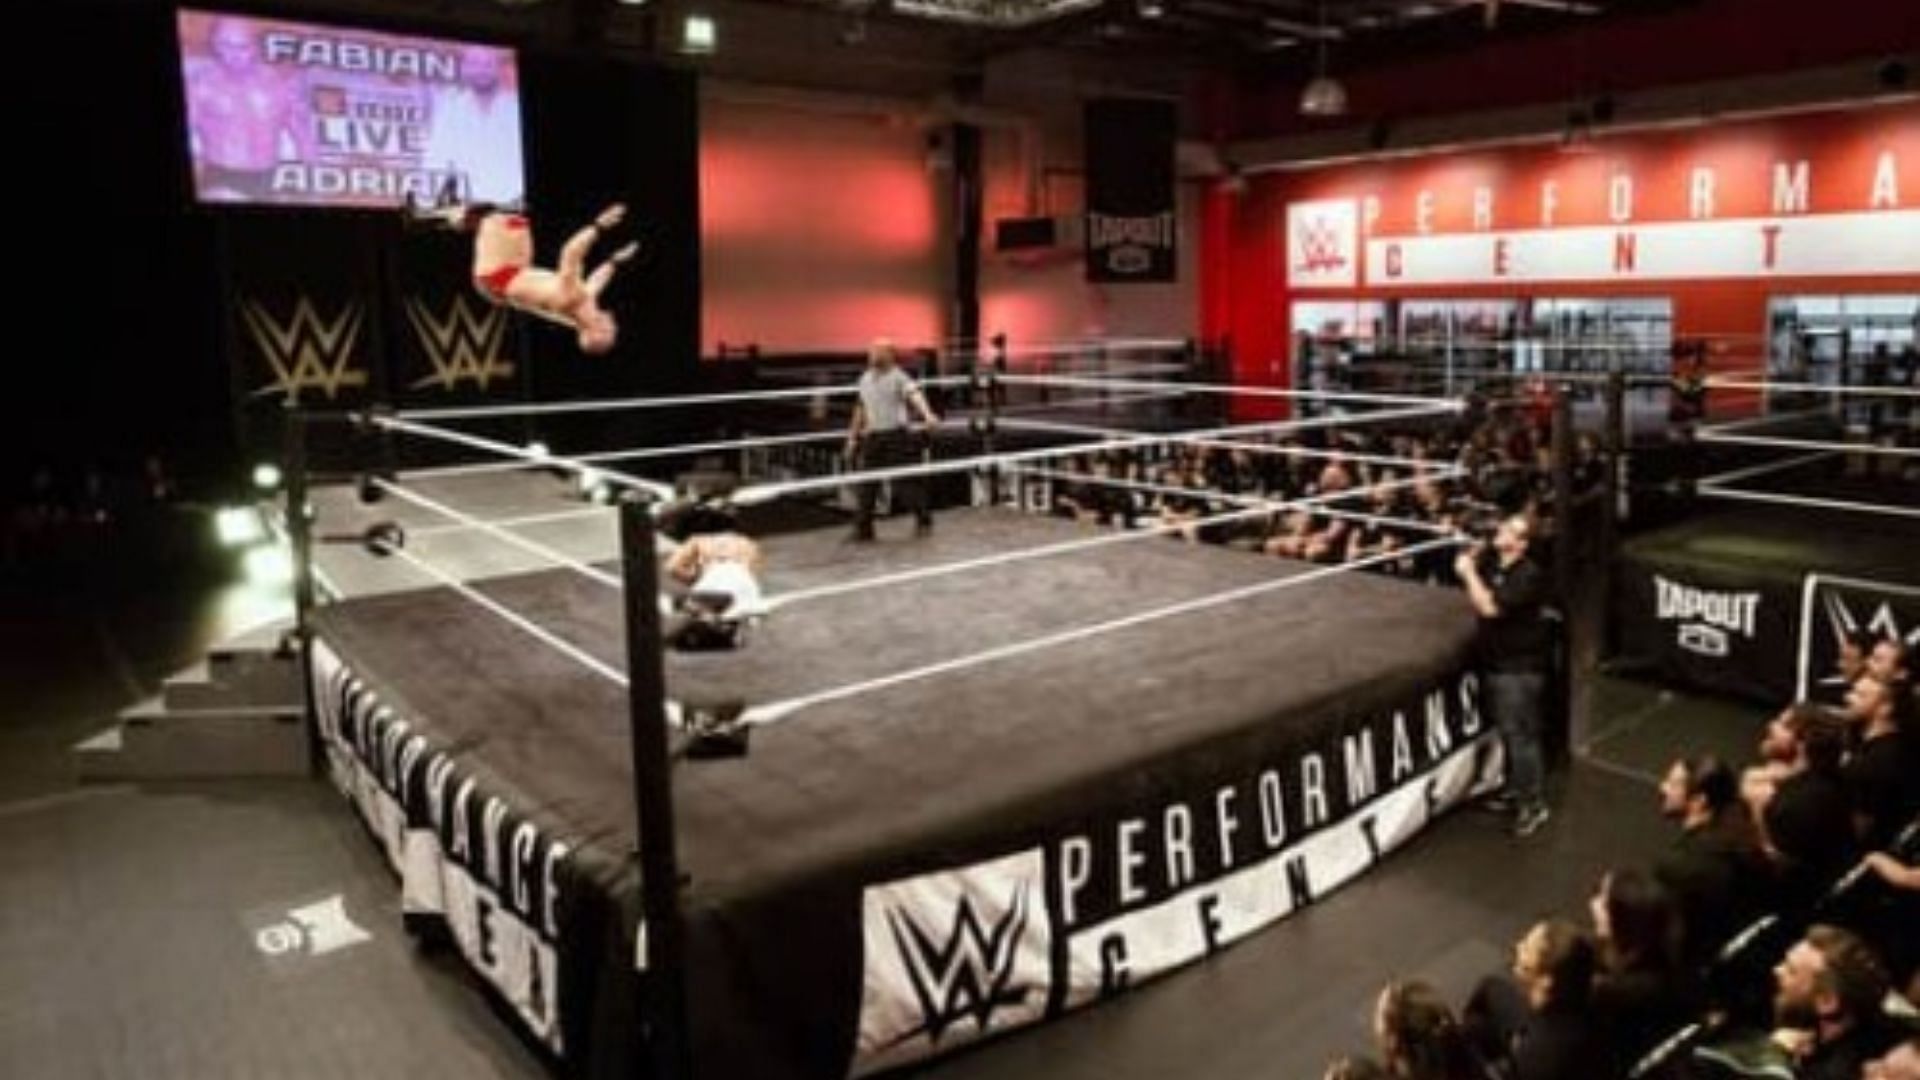 The WWE Performance Center opened in 2013